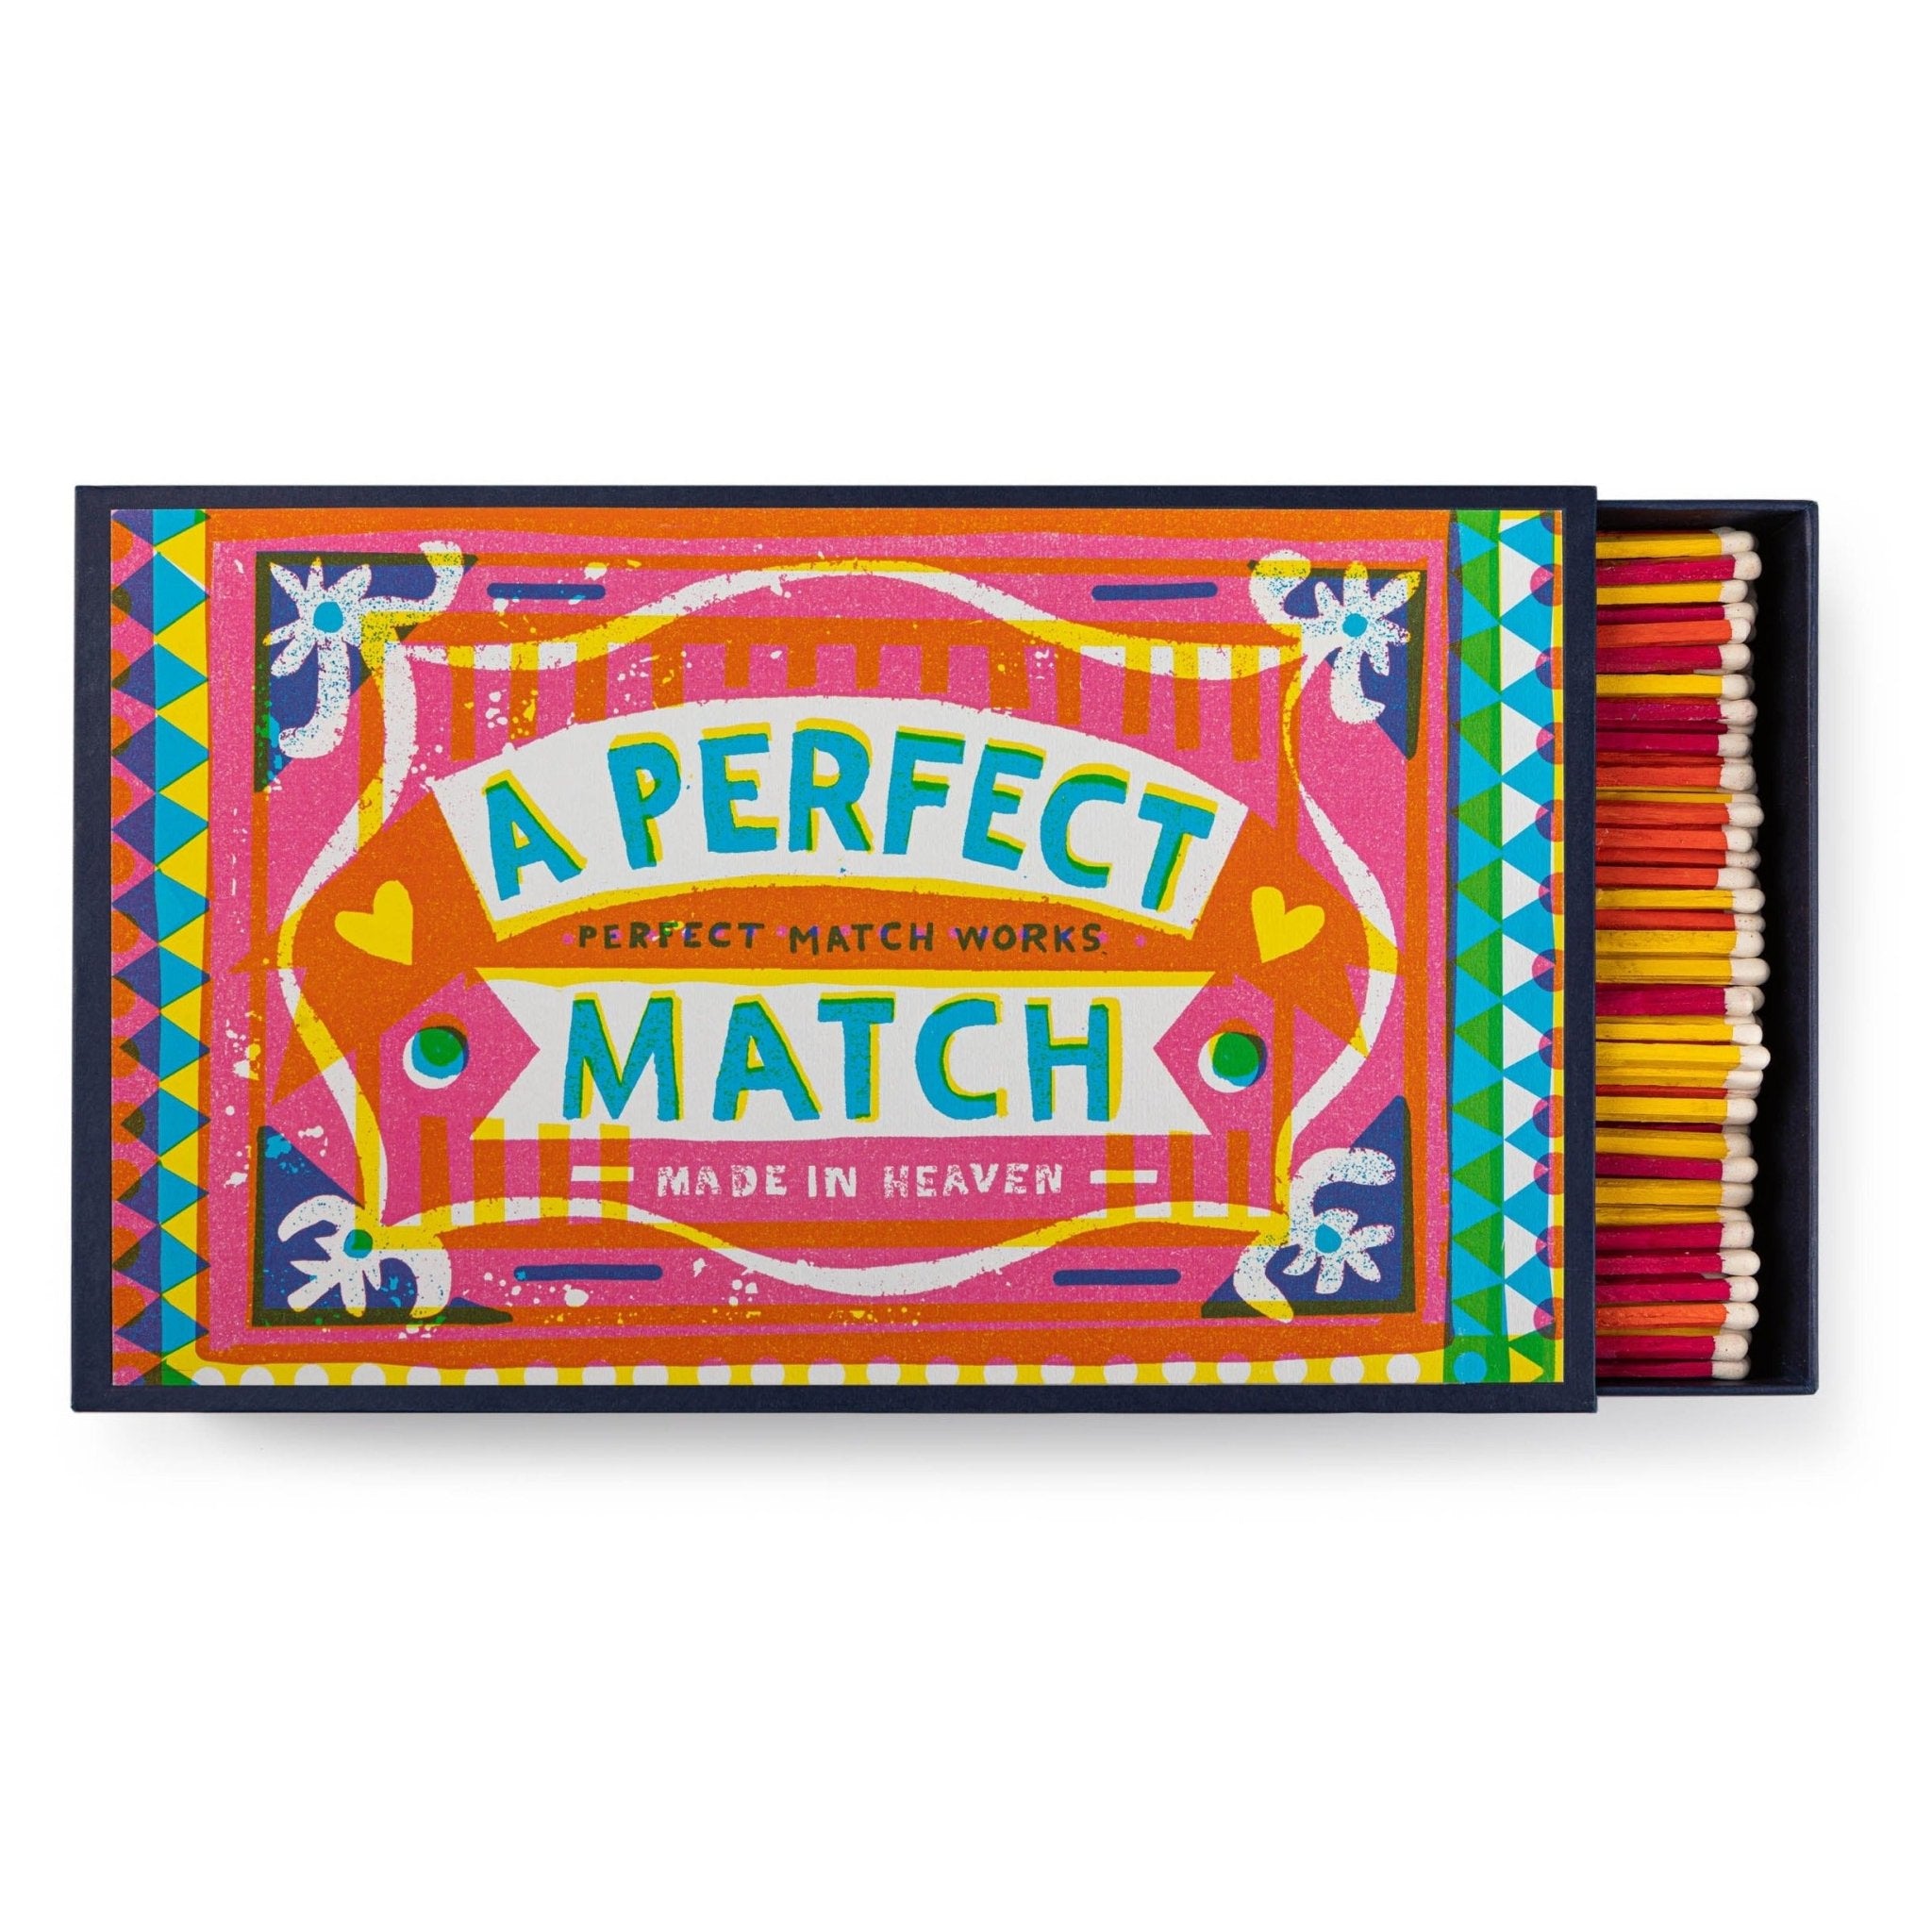 Luxury Giant Matches - The Perfect Match - Life of Riley